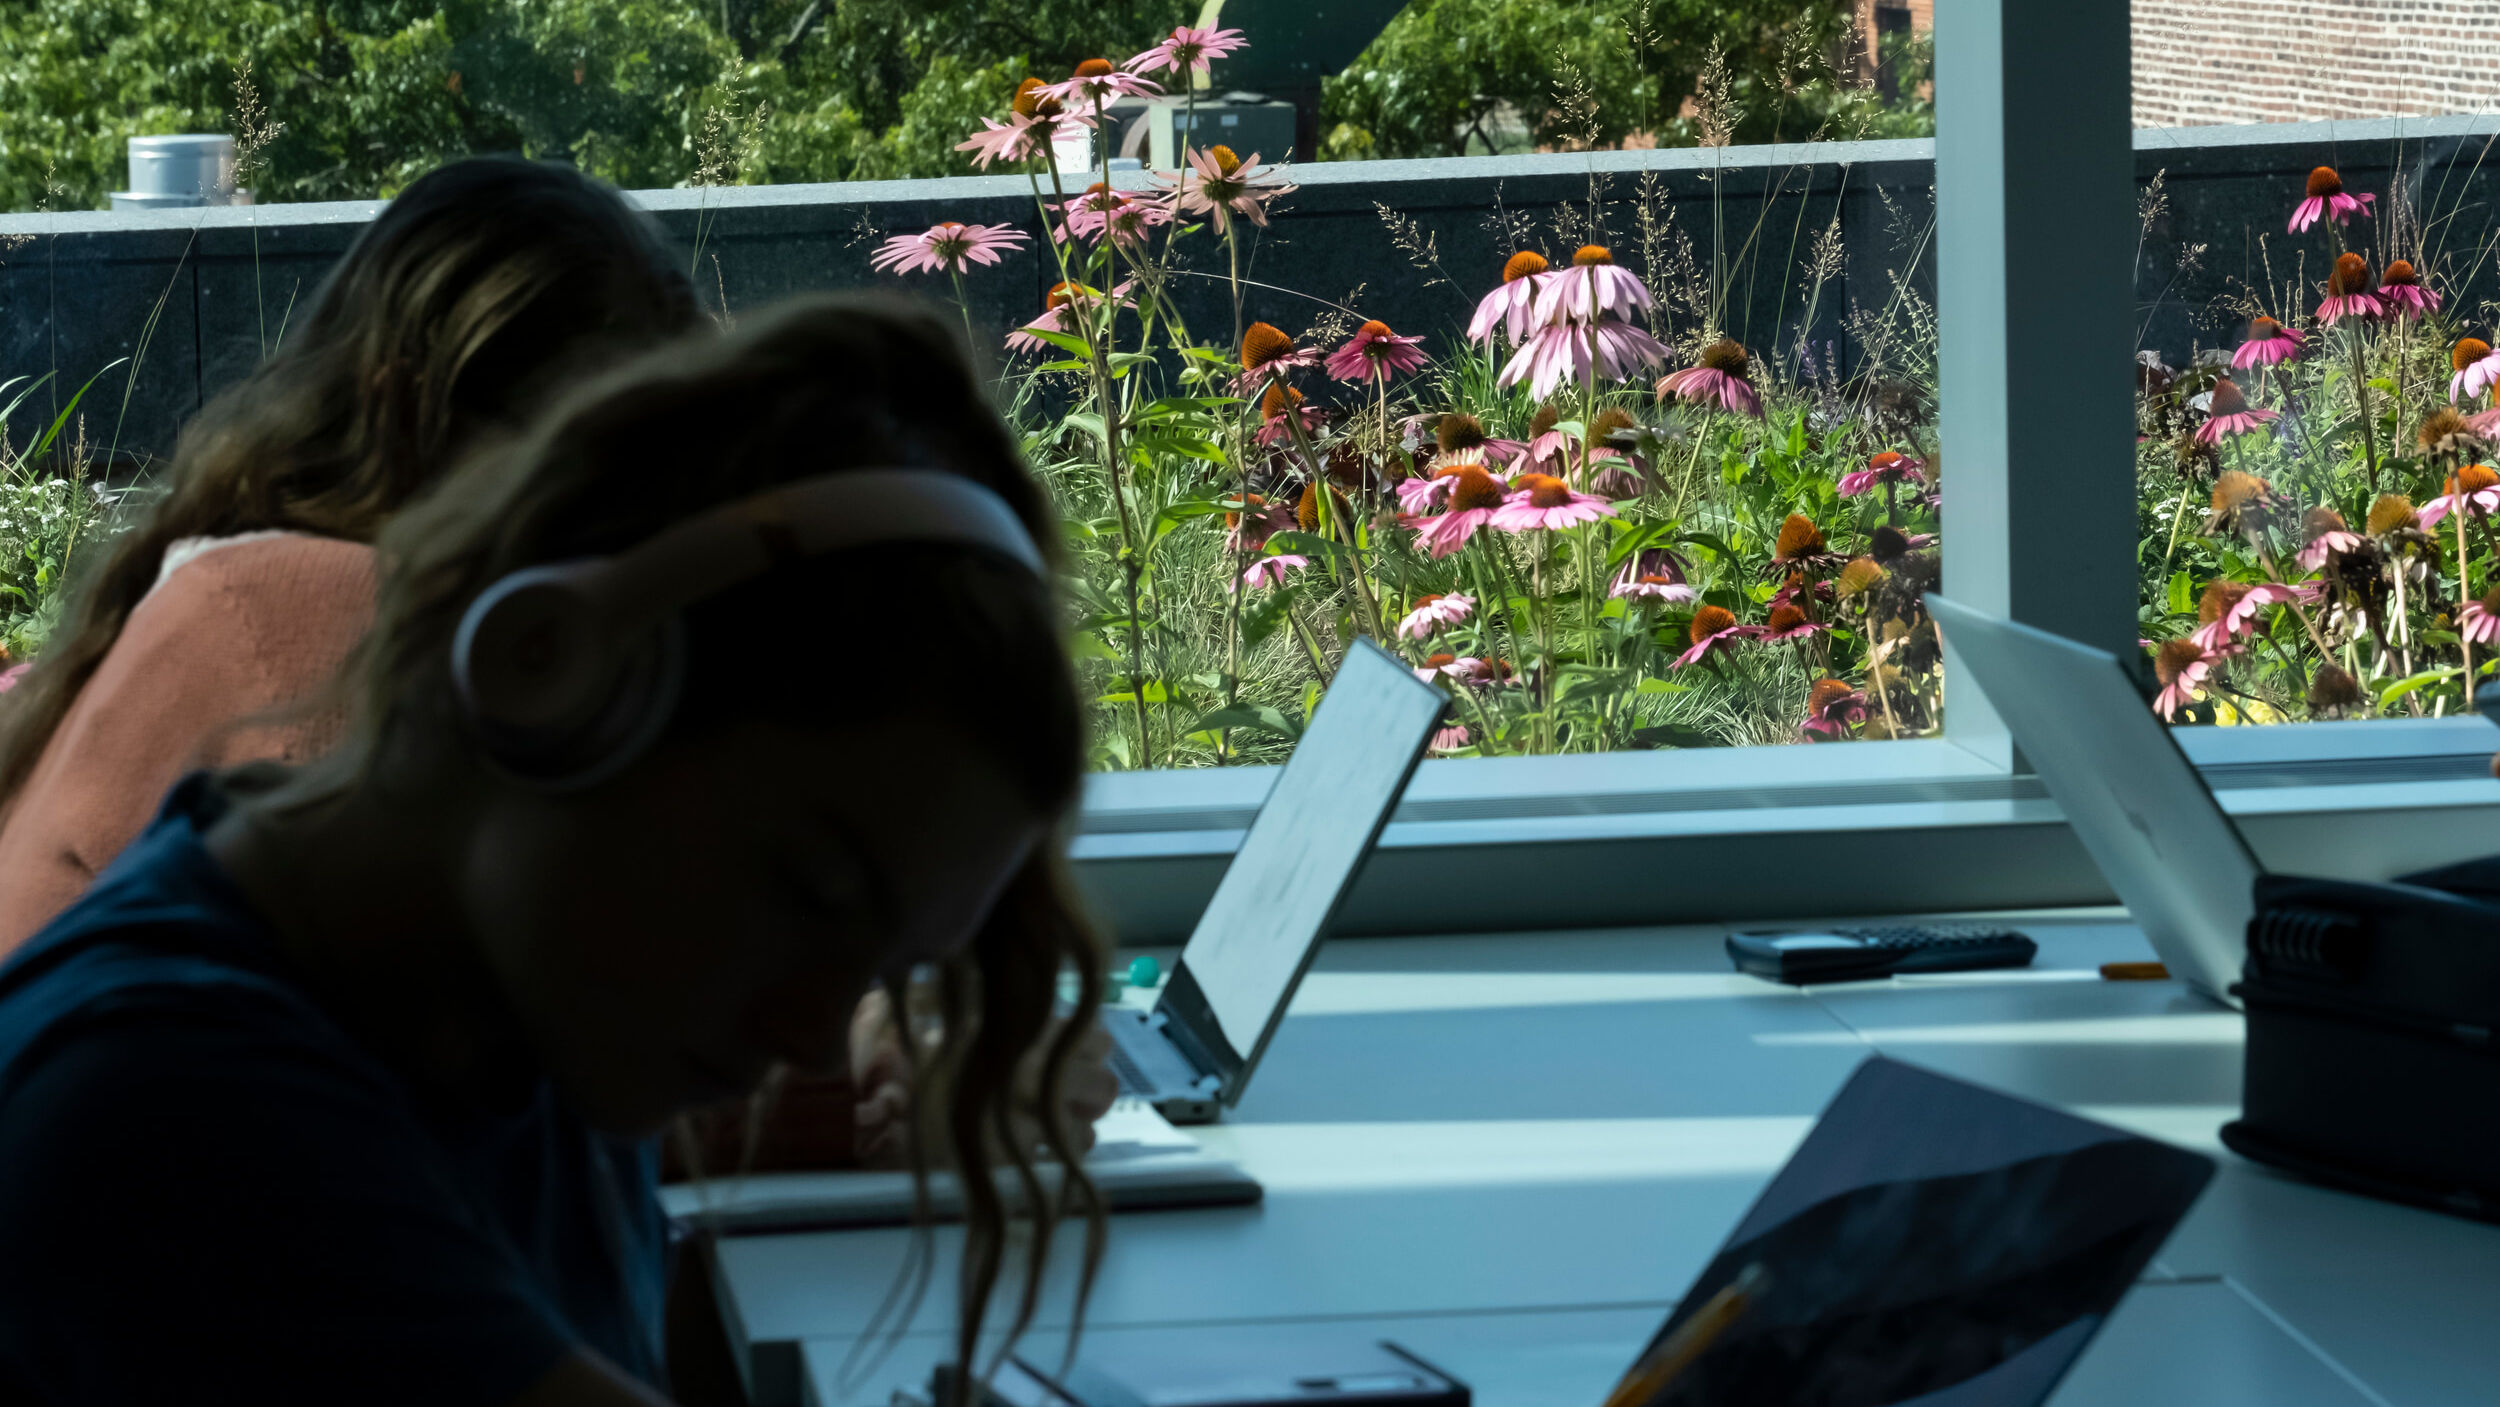 Students studying in Charles Library, with the green roof visible through a window nearby.